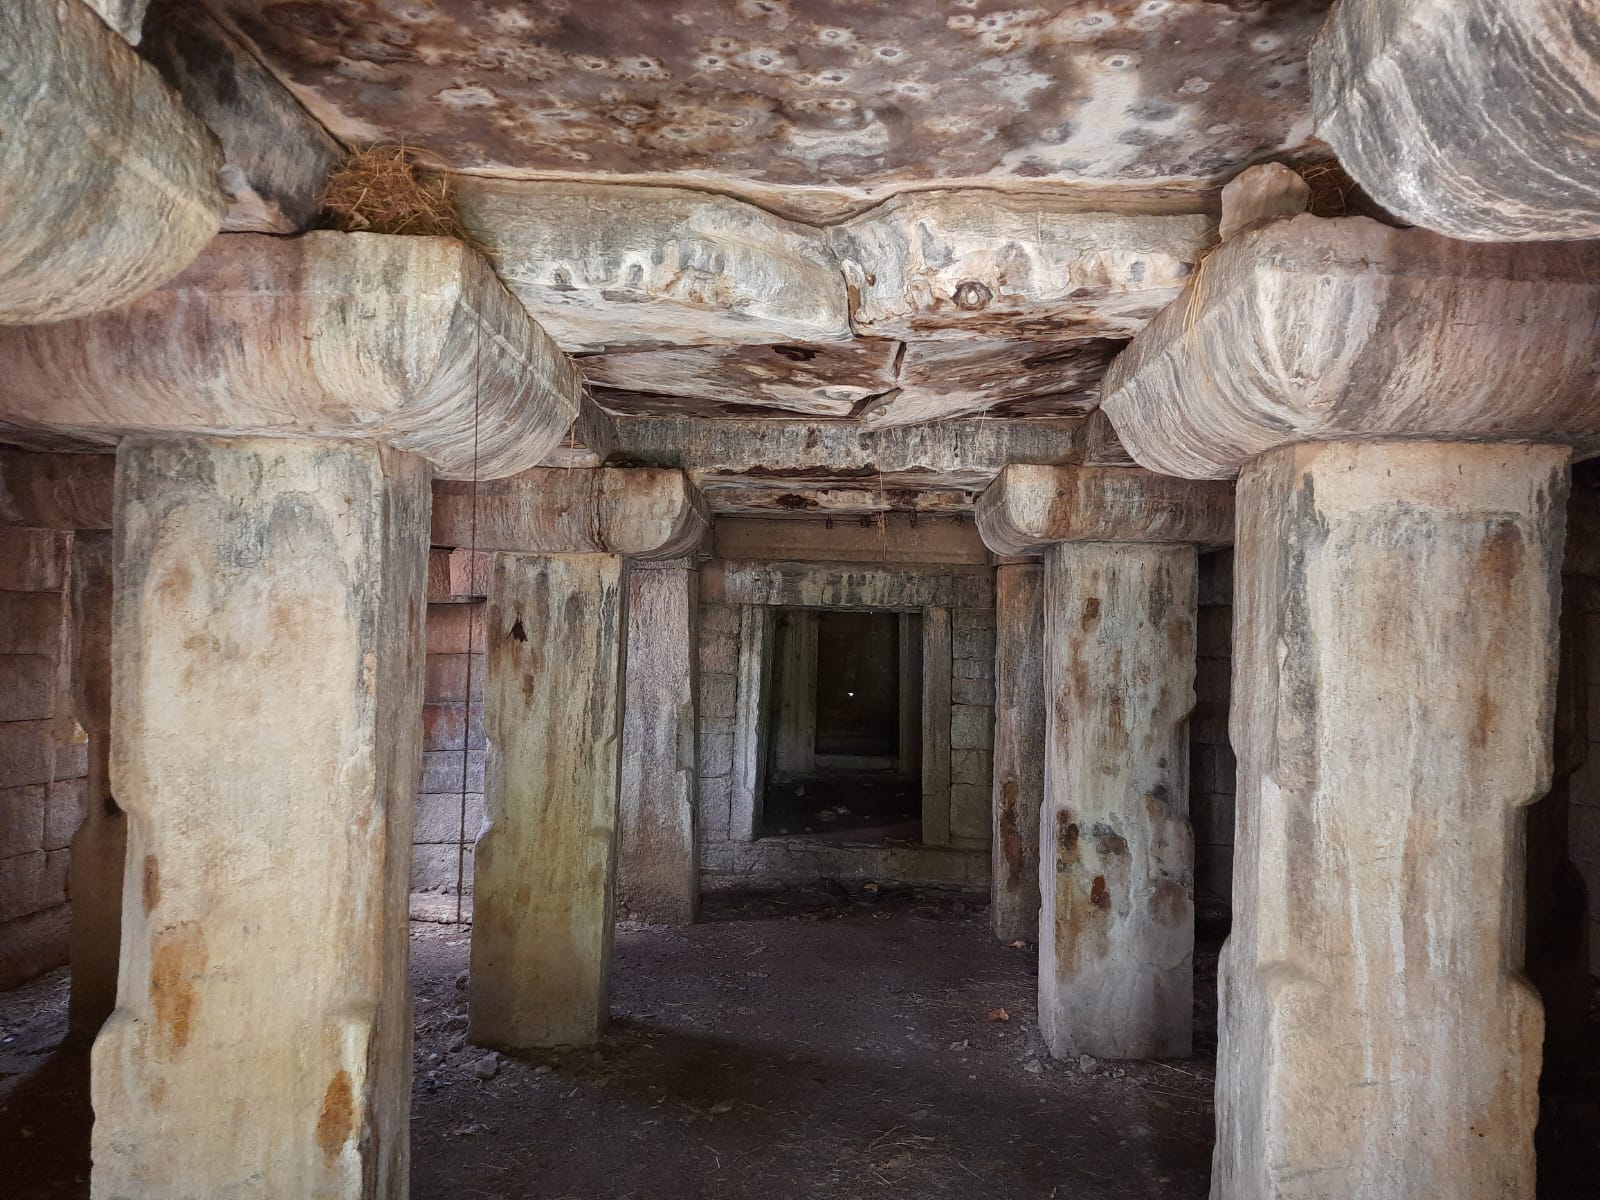 1500 Year Old Ancient Badami Chalukya Temples Found In Indian Village